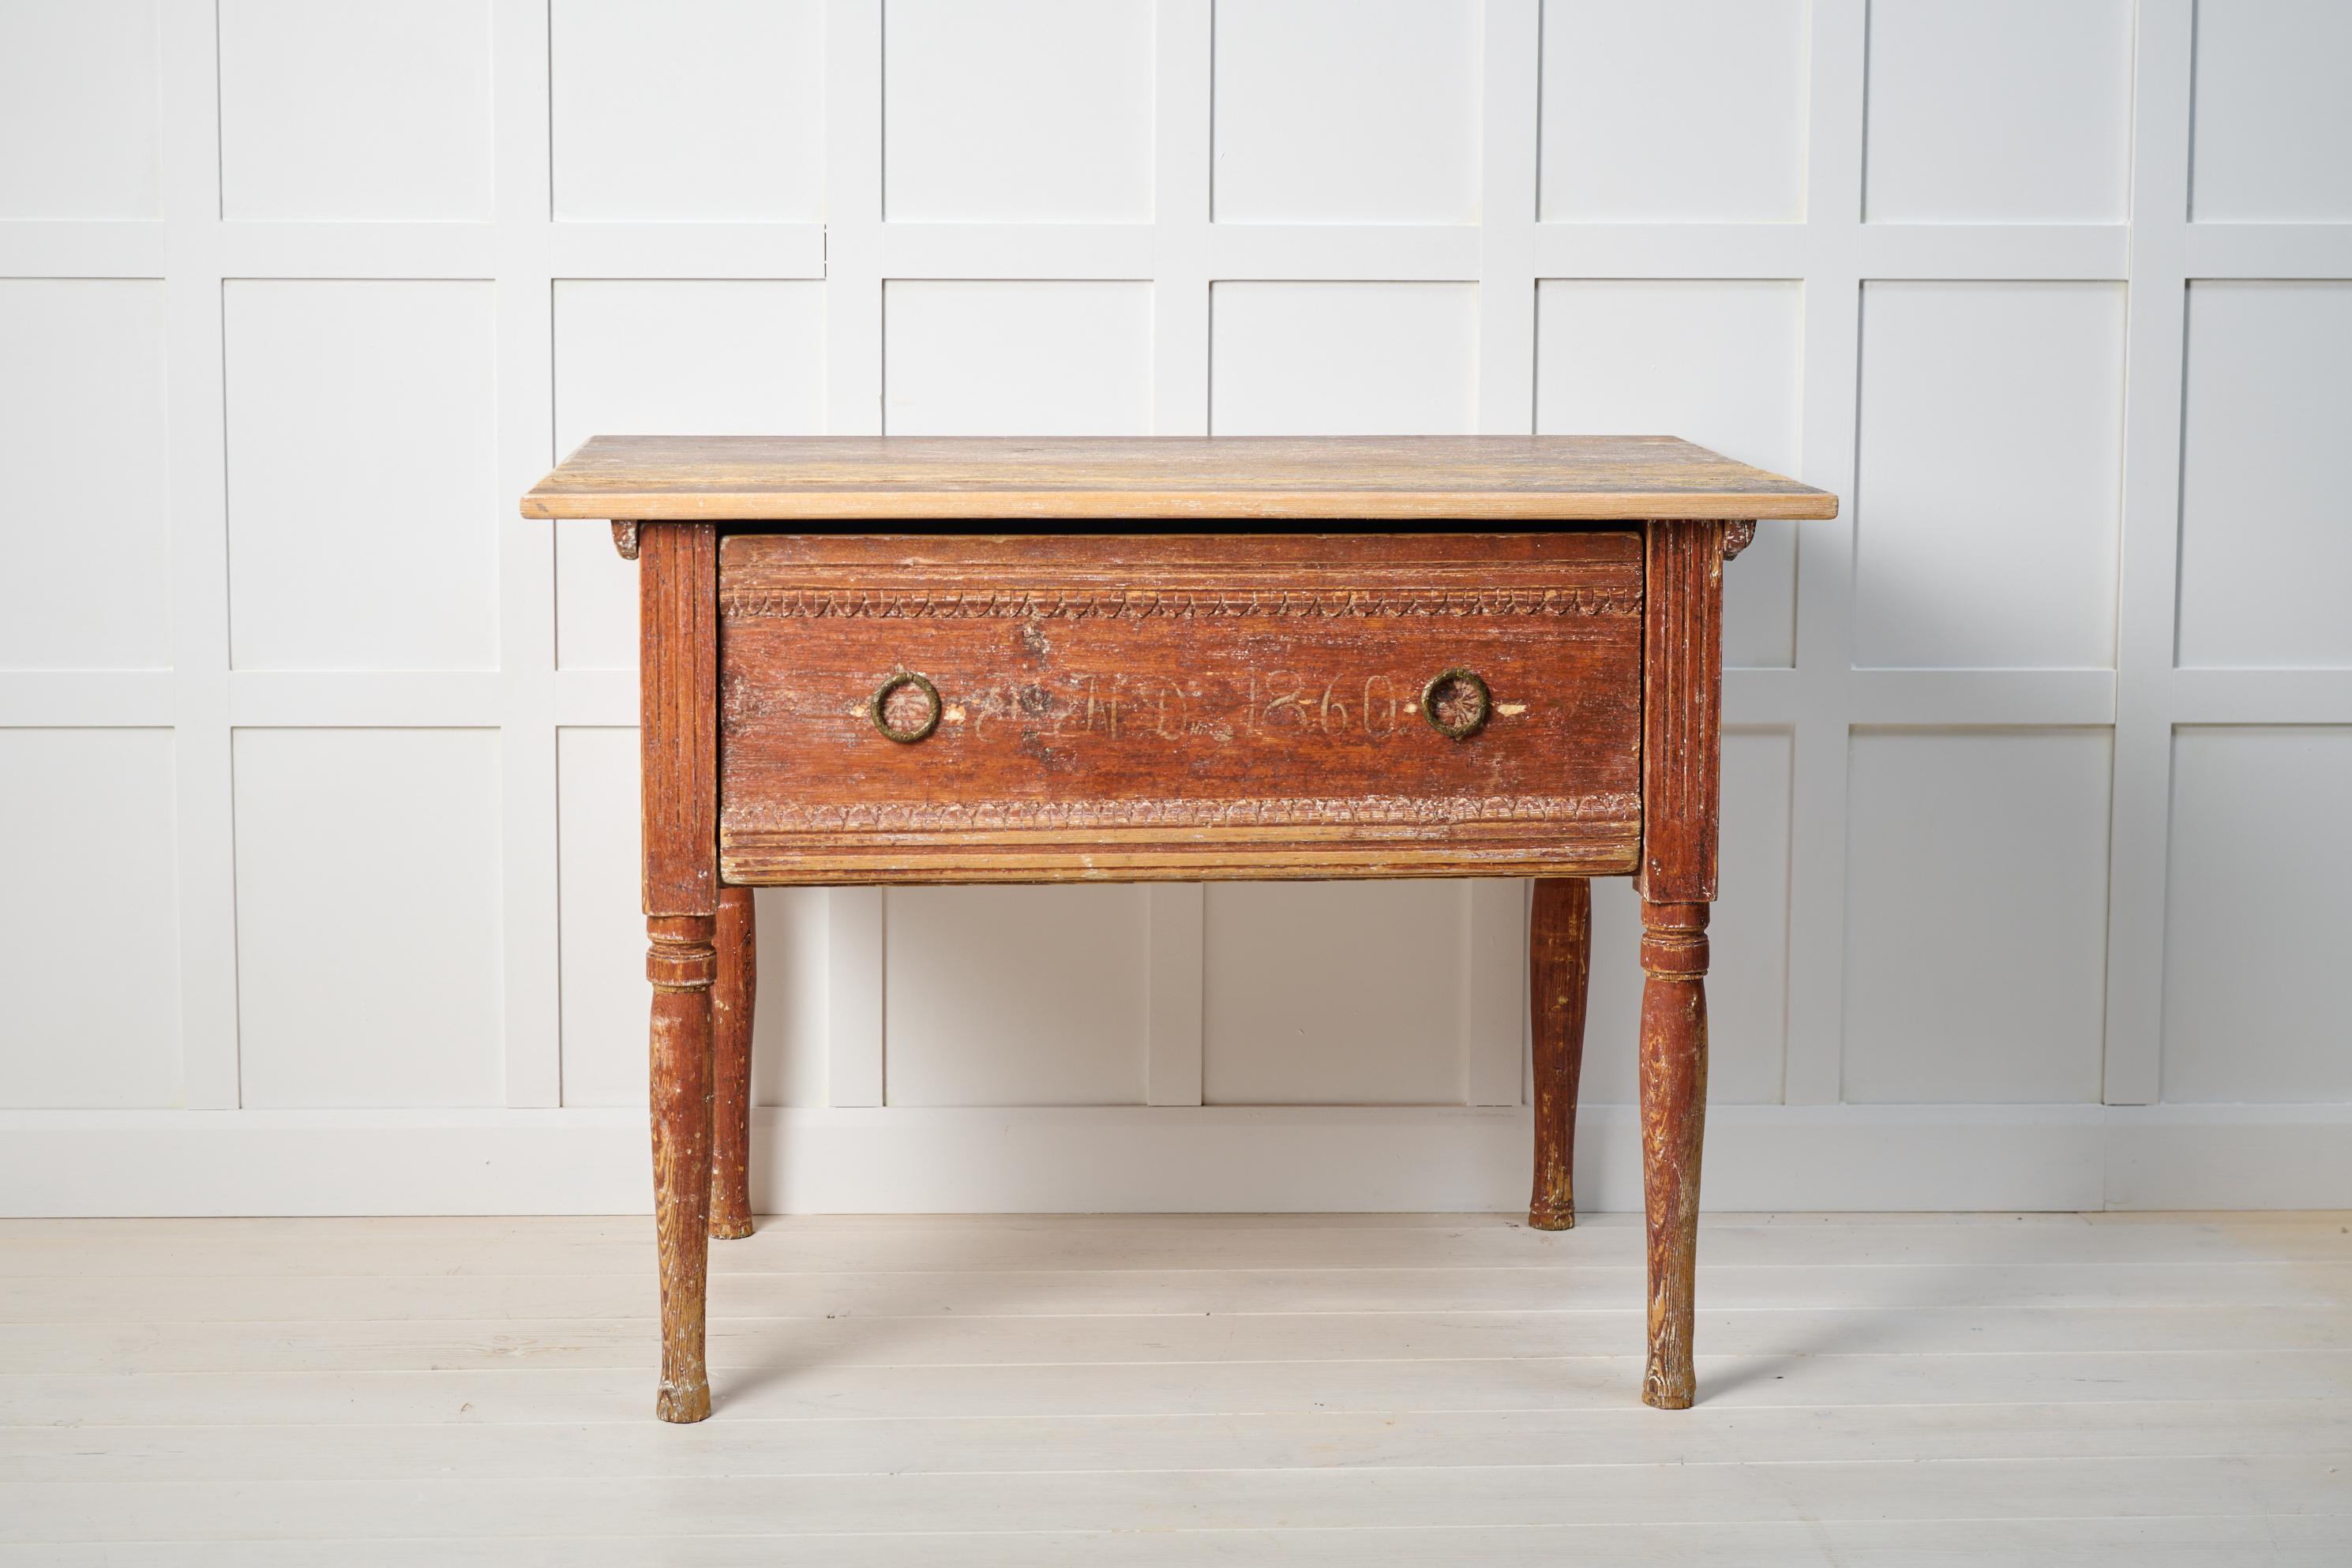 Antique Swedish country table dated 1860. The table is a genuine country house furniture that has been dry scraped by hand to the first layer of paint. The drawer is painted with a year and initials. Original drawer pulls. Healthy and solid frame.